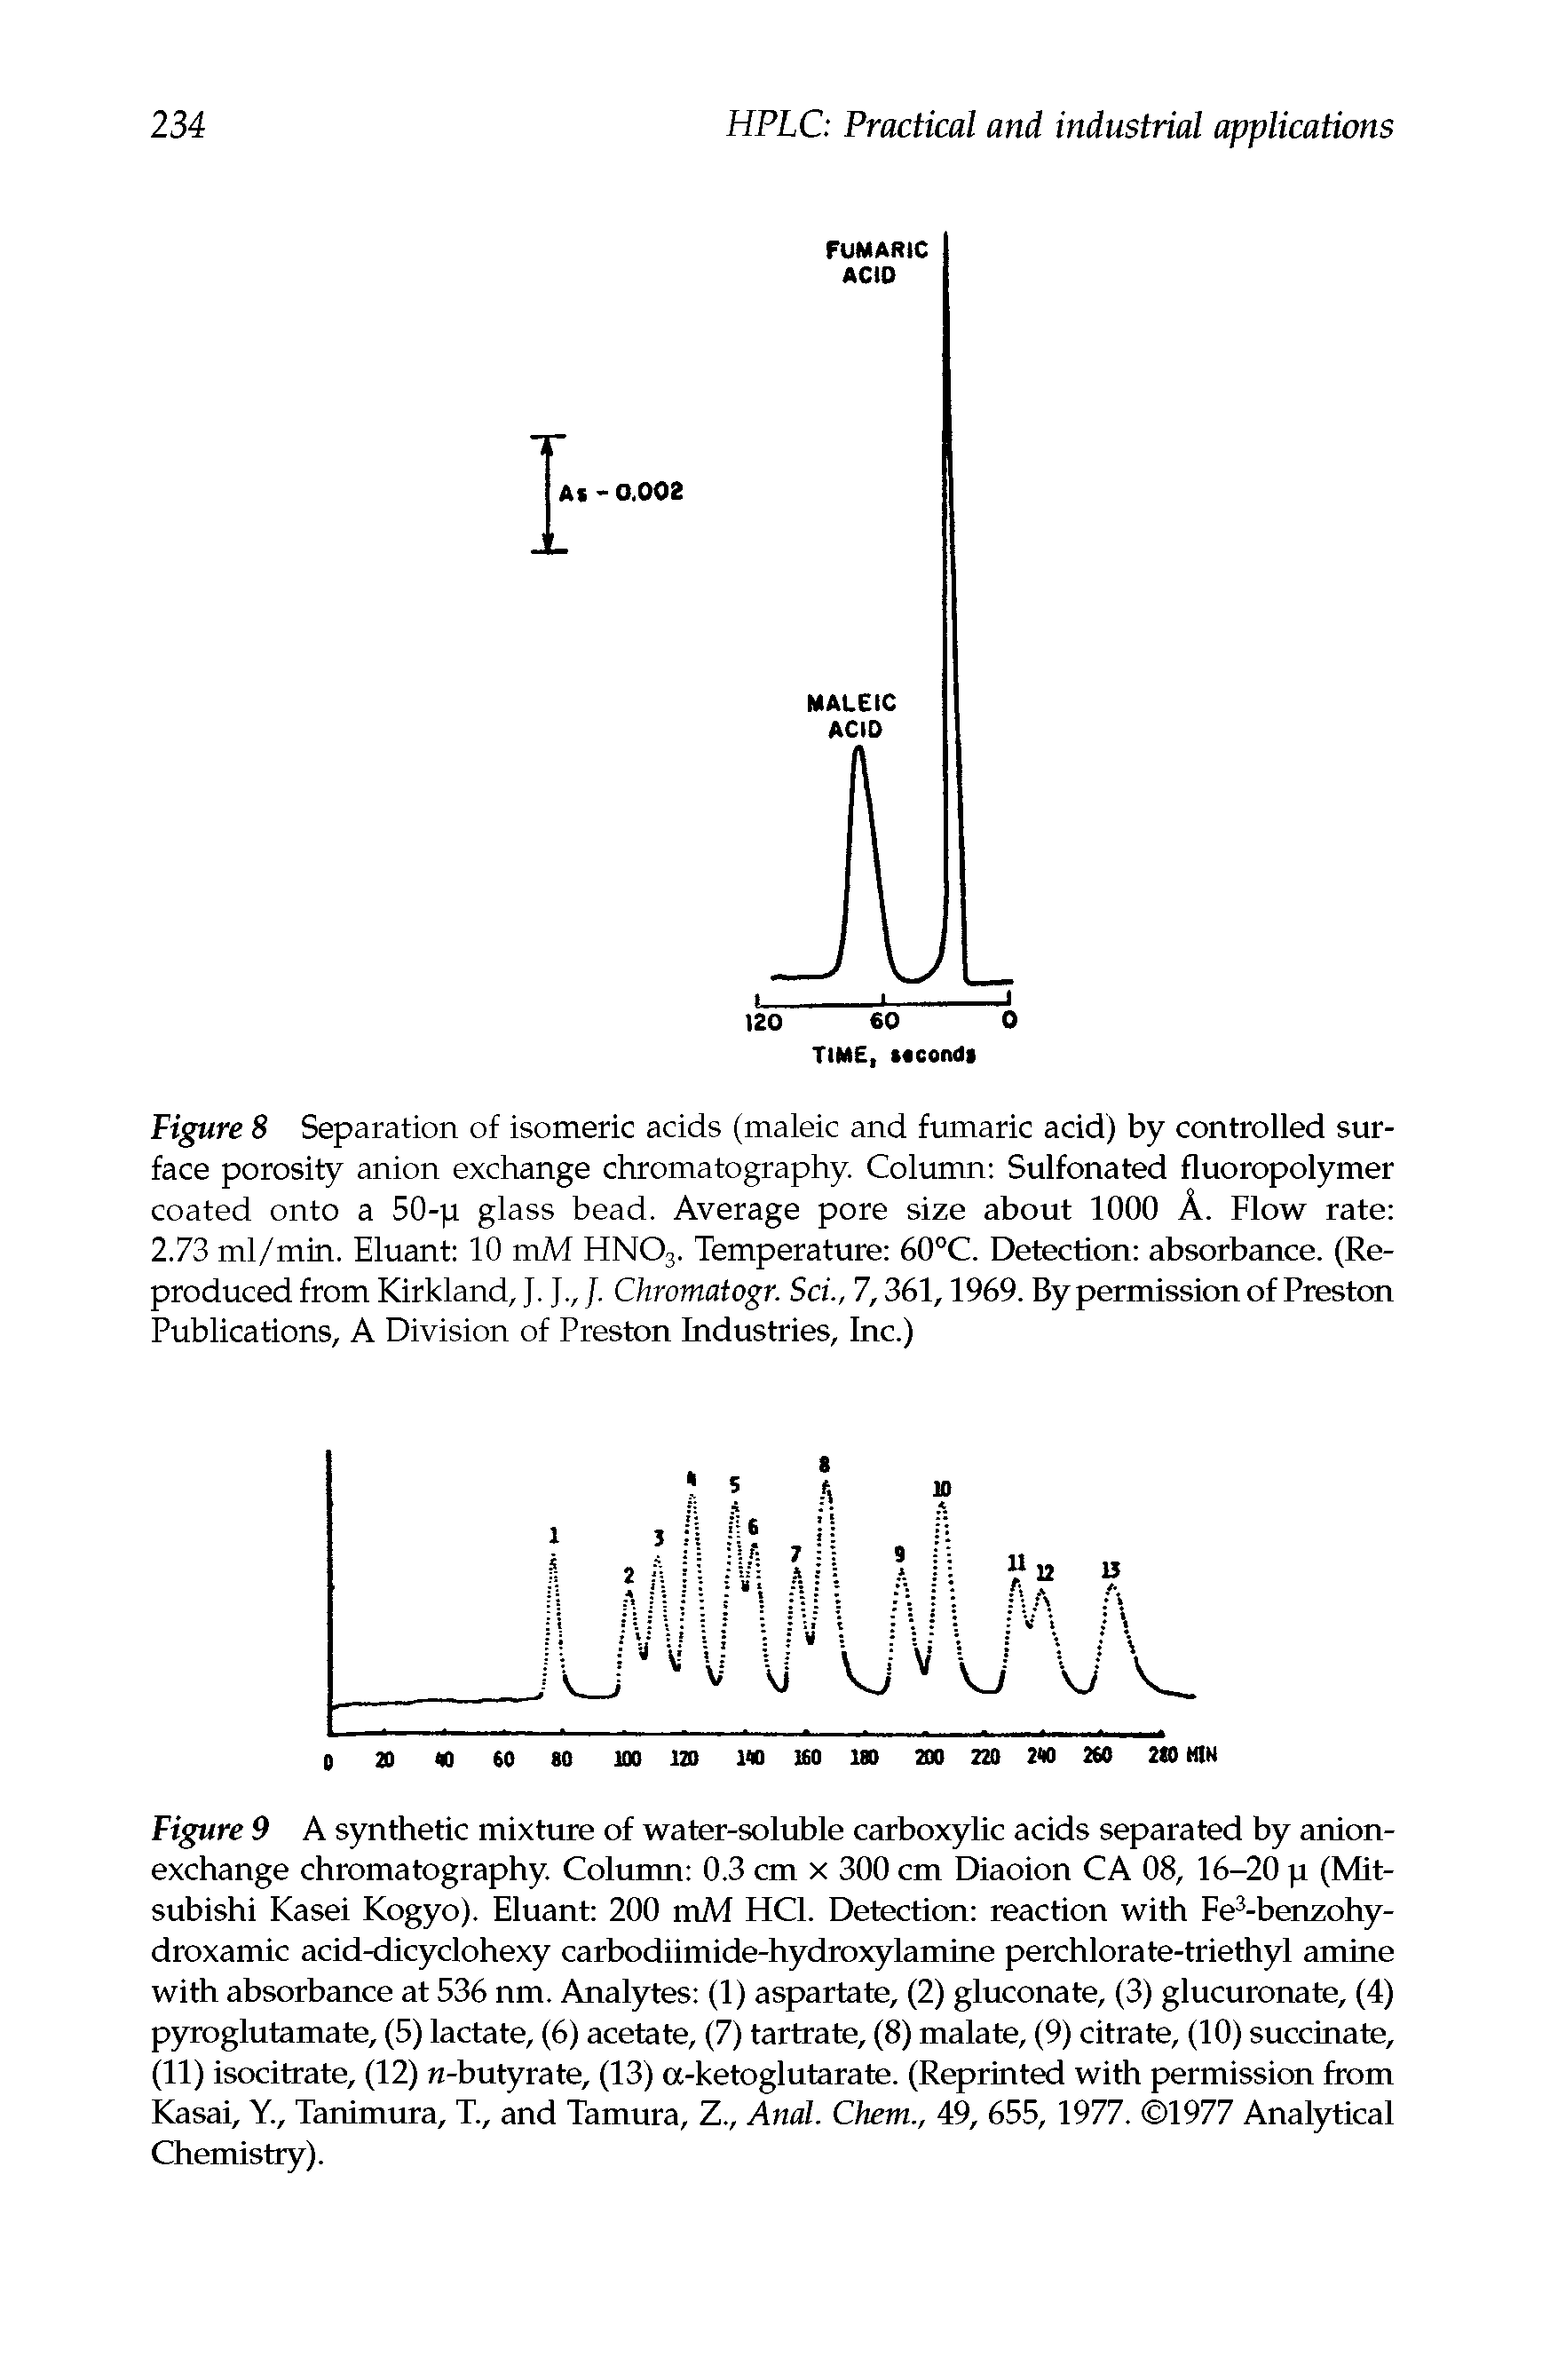 Figure 9 A synthetic mixture of water-soluble carboxylic acids separated by anion-exchange chromatography. Column 0.3 cm x 300 cm Diaoion CA 08, 16-20 p (Mitsubishi Kasei Kogyo). Eluant 200 mM HC1. Detection reaction with Fe3-benzohy-droxamic acid-dicyclohexy carbodiimide-hydroxylamine perchlorate-triethyl amine with absorbance at 536 nm. Analytes (1) aspartate, (2) gluconate, (3) glucuronate, (4) pyroglutamate, (5) lactate, (6) acetate, (7) tartrate, (8) malate, (9) citrate, (10) succinate, (11) isocitrate, (12) w-butyrate, (13) a-ketoglutarate. (Reprinted with permission from Kasai, Y., Tanimura, T., and Tamura, Z., Anal. Chem., 49, 655, 1977. 1977 Analytical Chemistry).